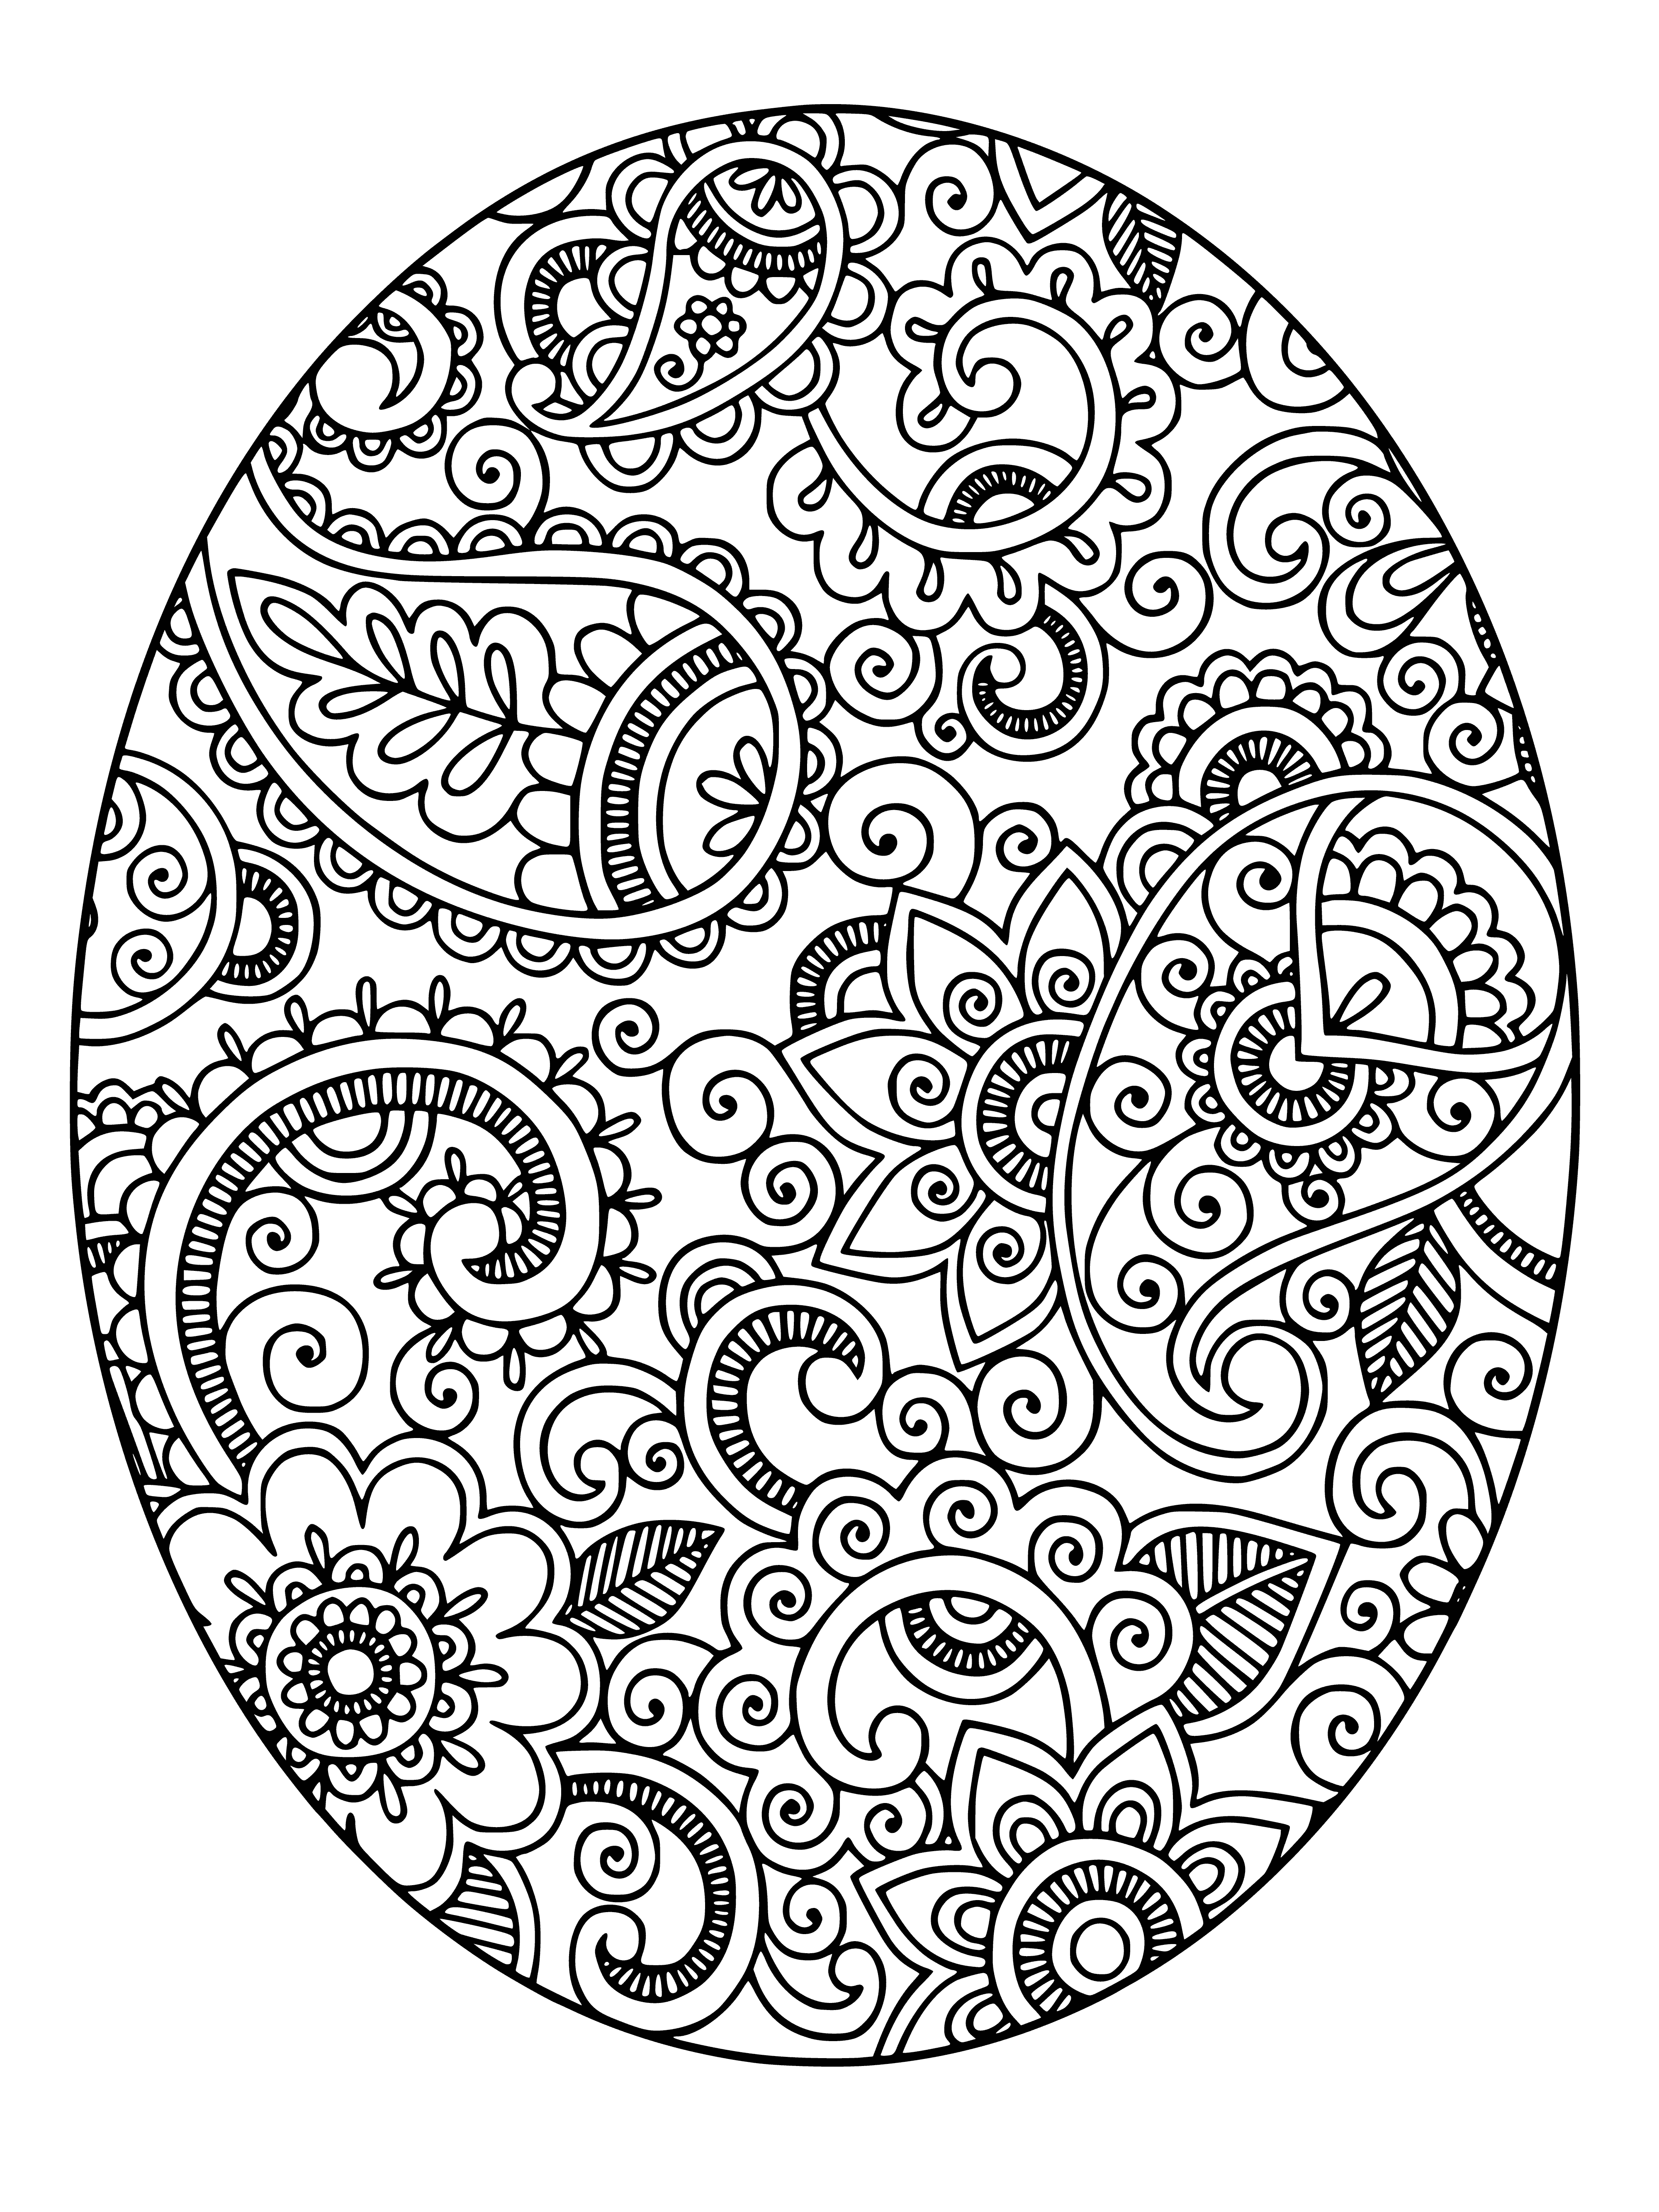 coloring page: Three Easter eggs, two blue (floral & polka dot designs) and one pink (stripes design). #Easter #Coloring